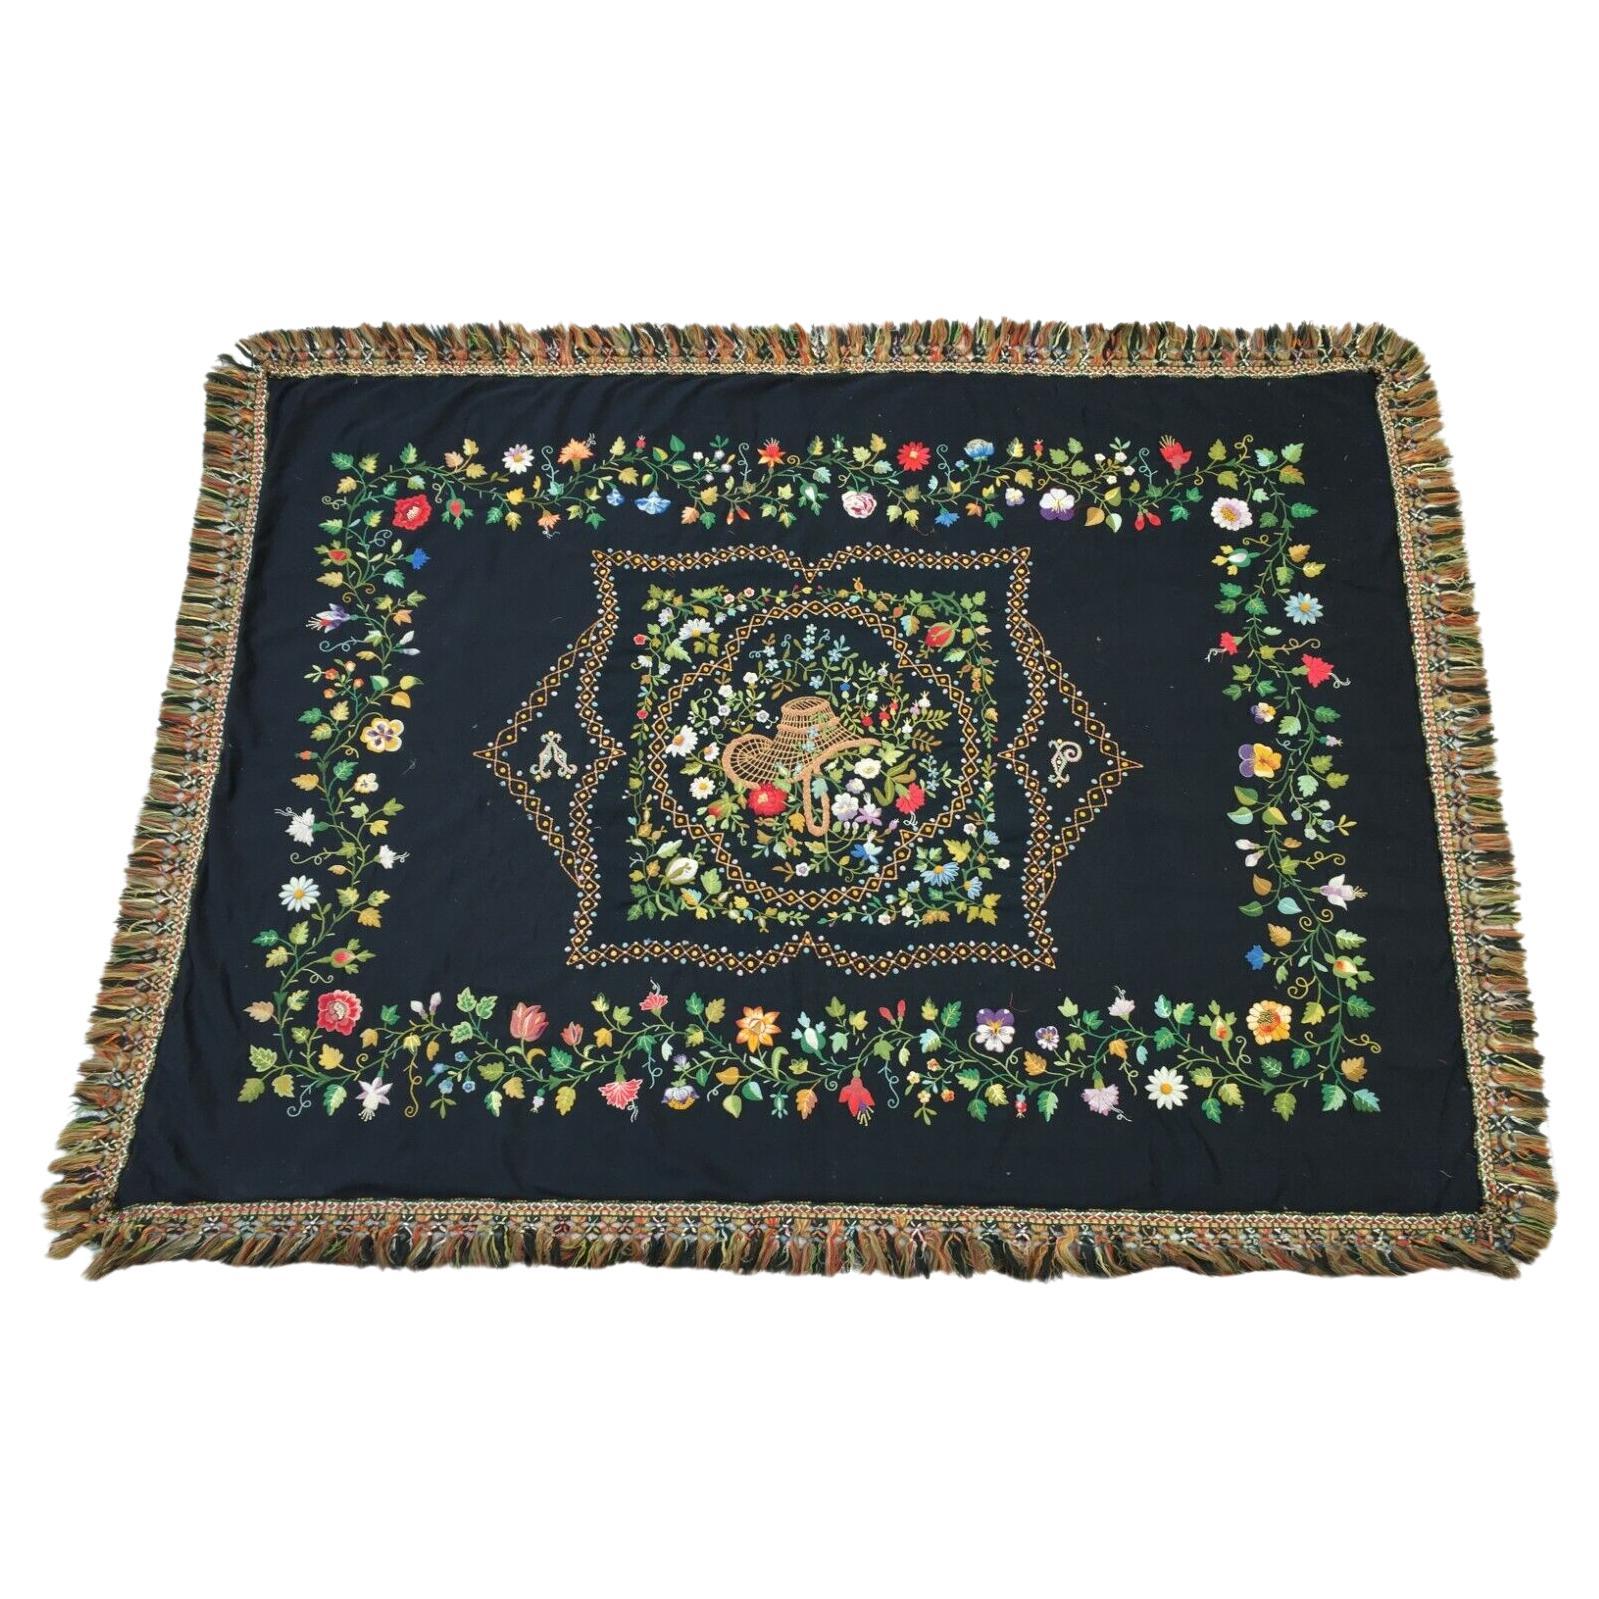 Handmade Antique French Needlepoint Rug 4.1' x 5.5', 1900s - 1W10 For Sale